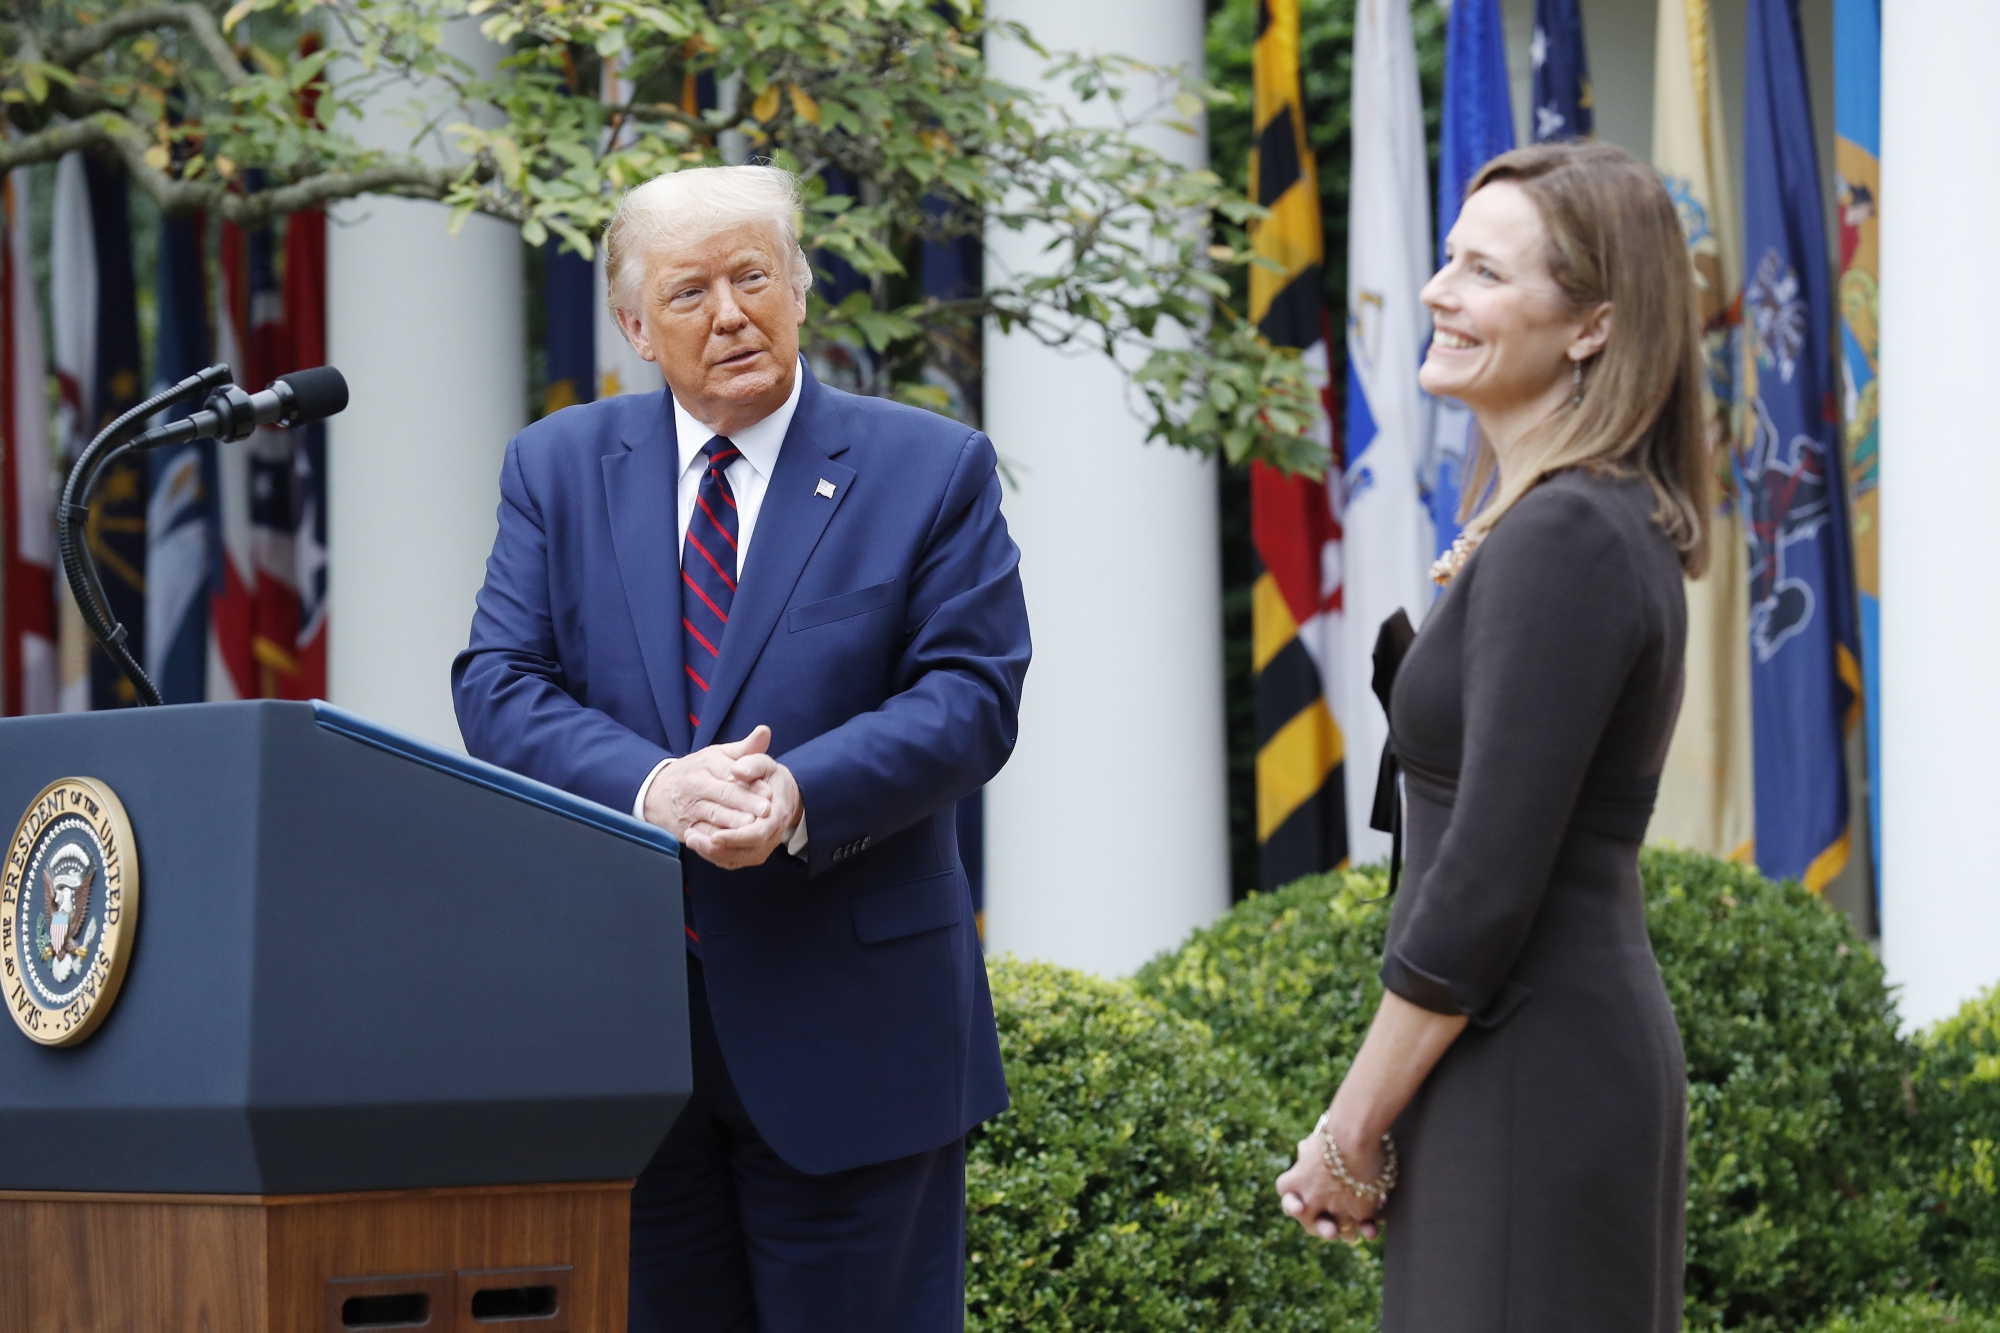 epaselect epa08700040 US President Donald J. Trump intriduces Judge Amy Coney Barrett (R) as his nominee to be an Associate Justice of the Supreme Court during a ceremony in the Rose Garden of the White House in Washington, DC, USA, 26 September 2020. Judge Barrett, if confirmed, will replace the late Justice Ruth Bader Ginsburg.  EPA/SHAWN THEW ArcInfo